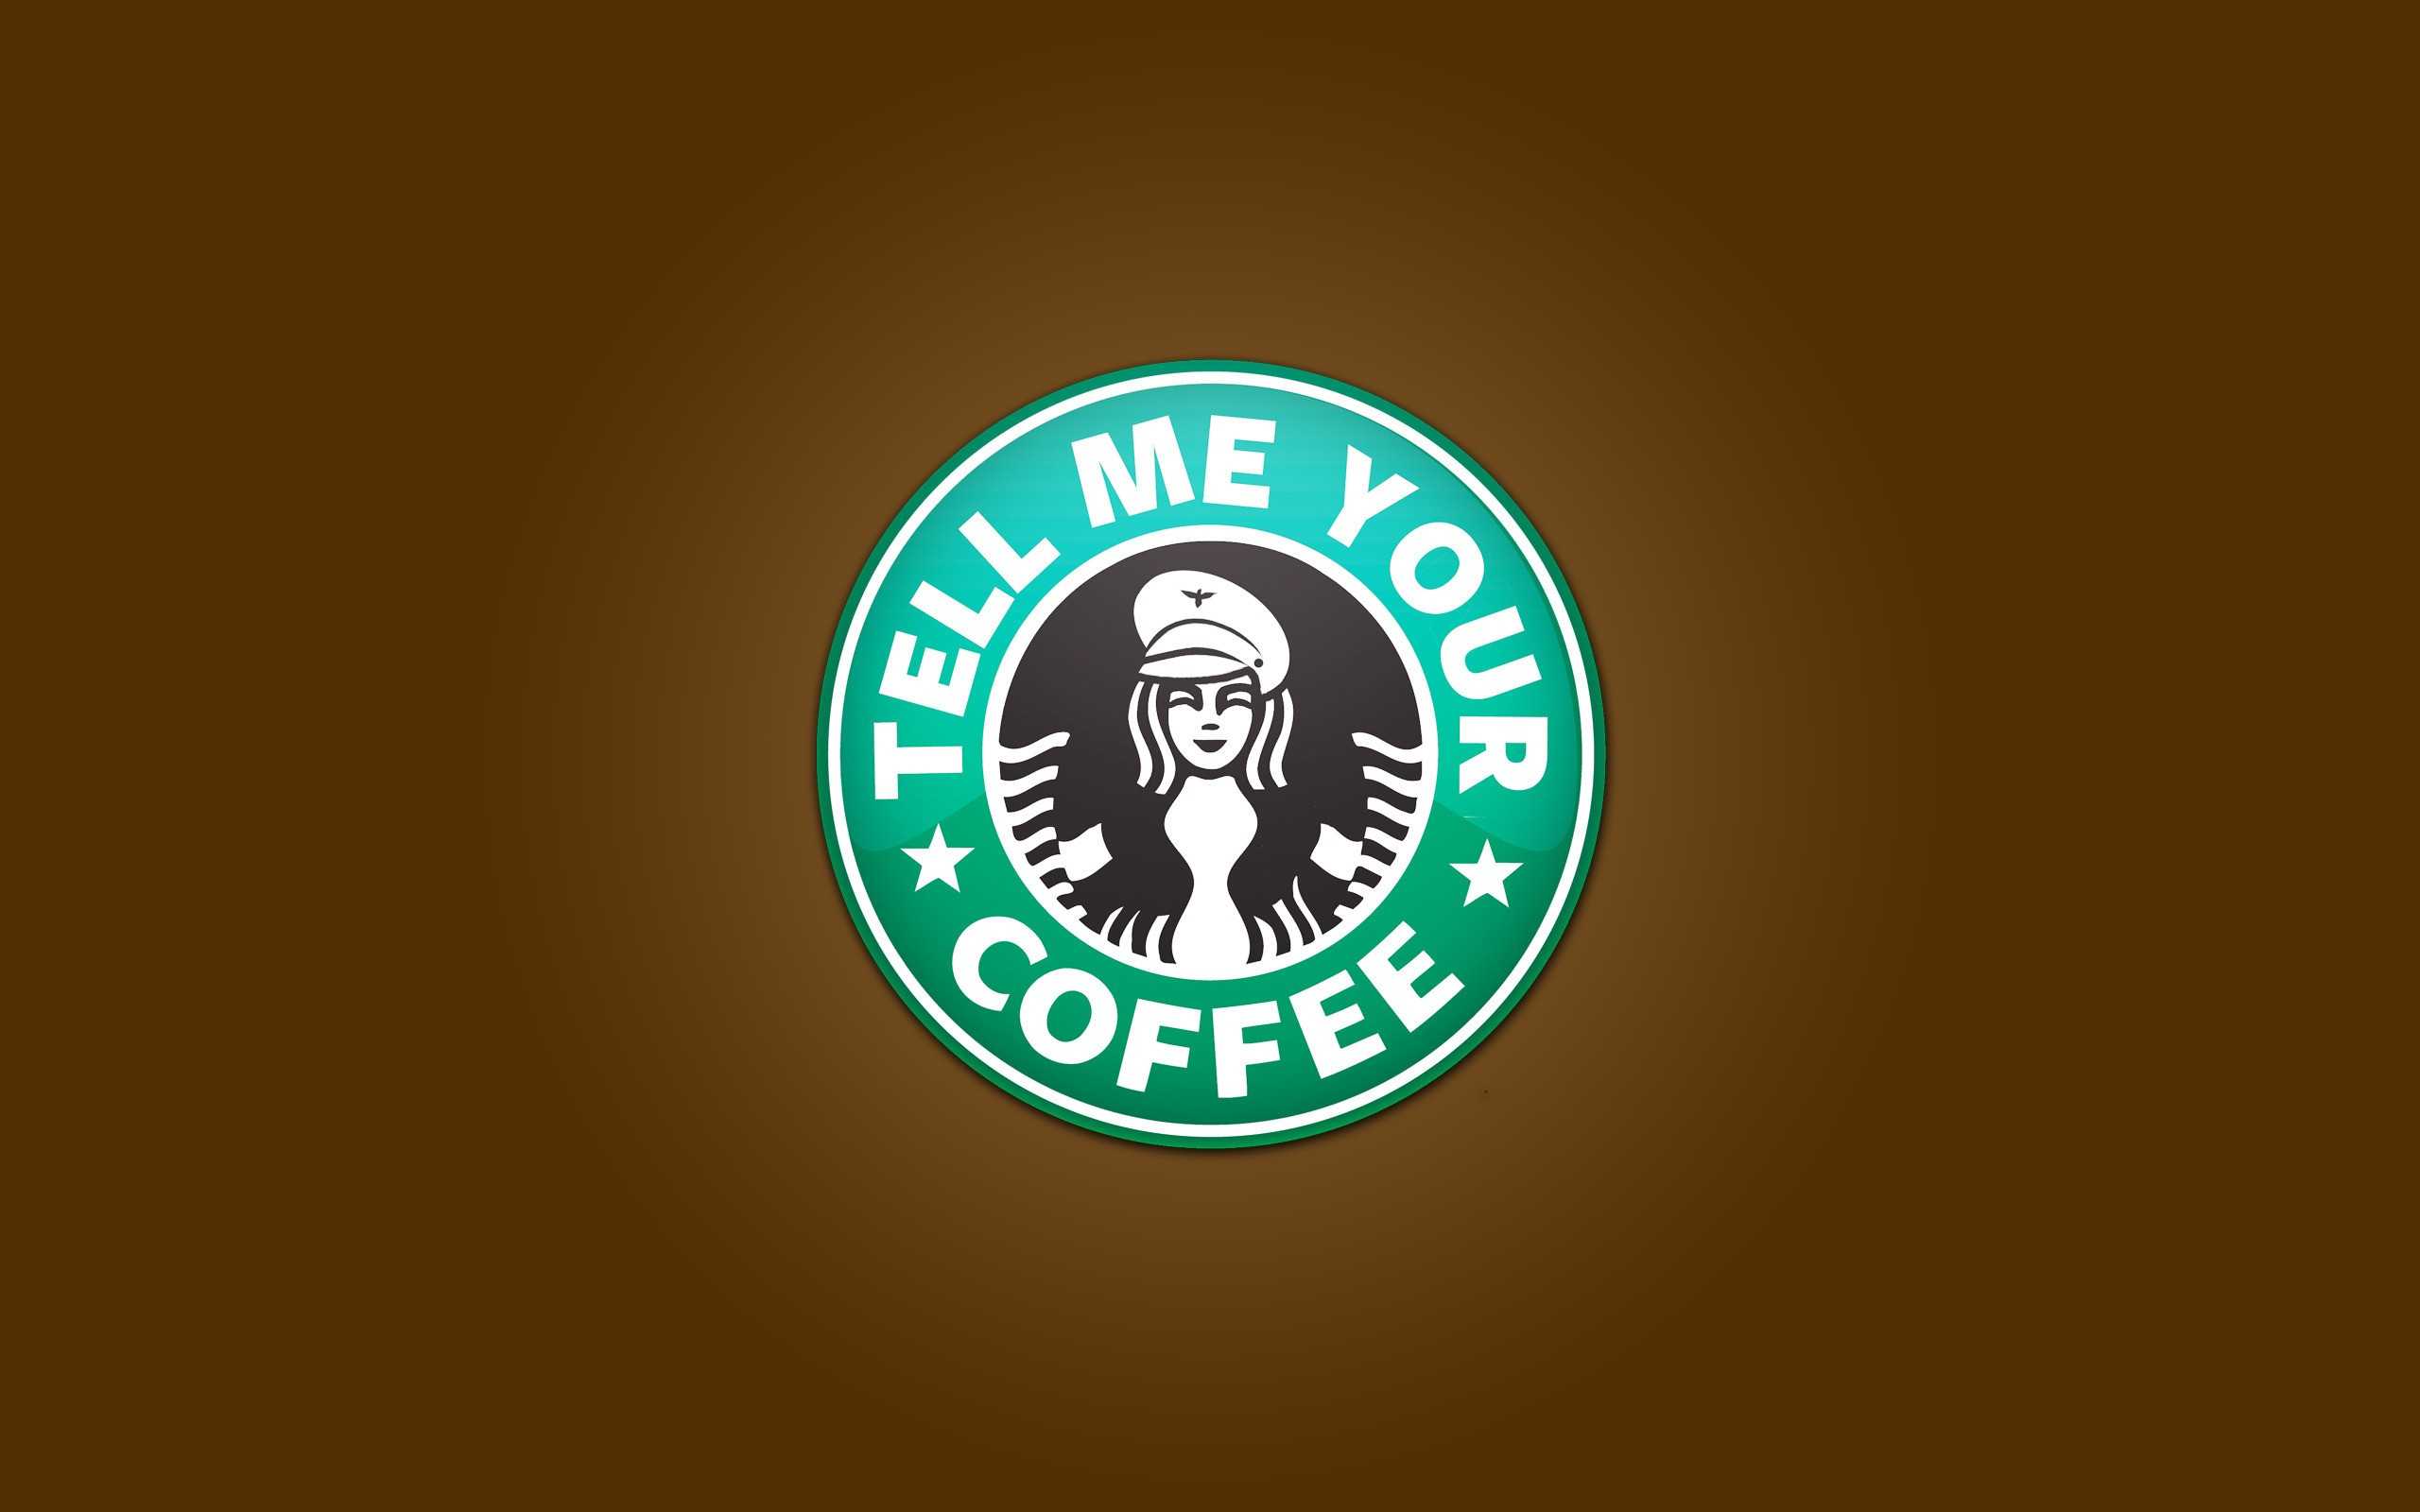 Starbucks Graphic Backgrounds For Powerpoint Templates – Ppt With Regard To Starbucks Powerpoint Template